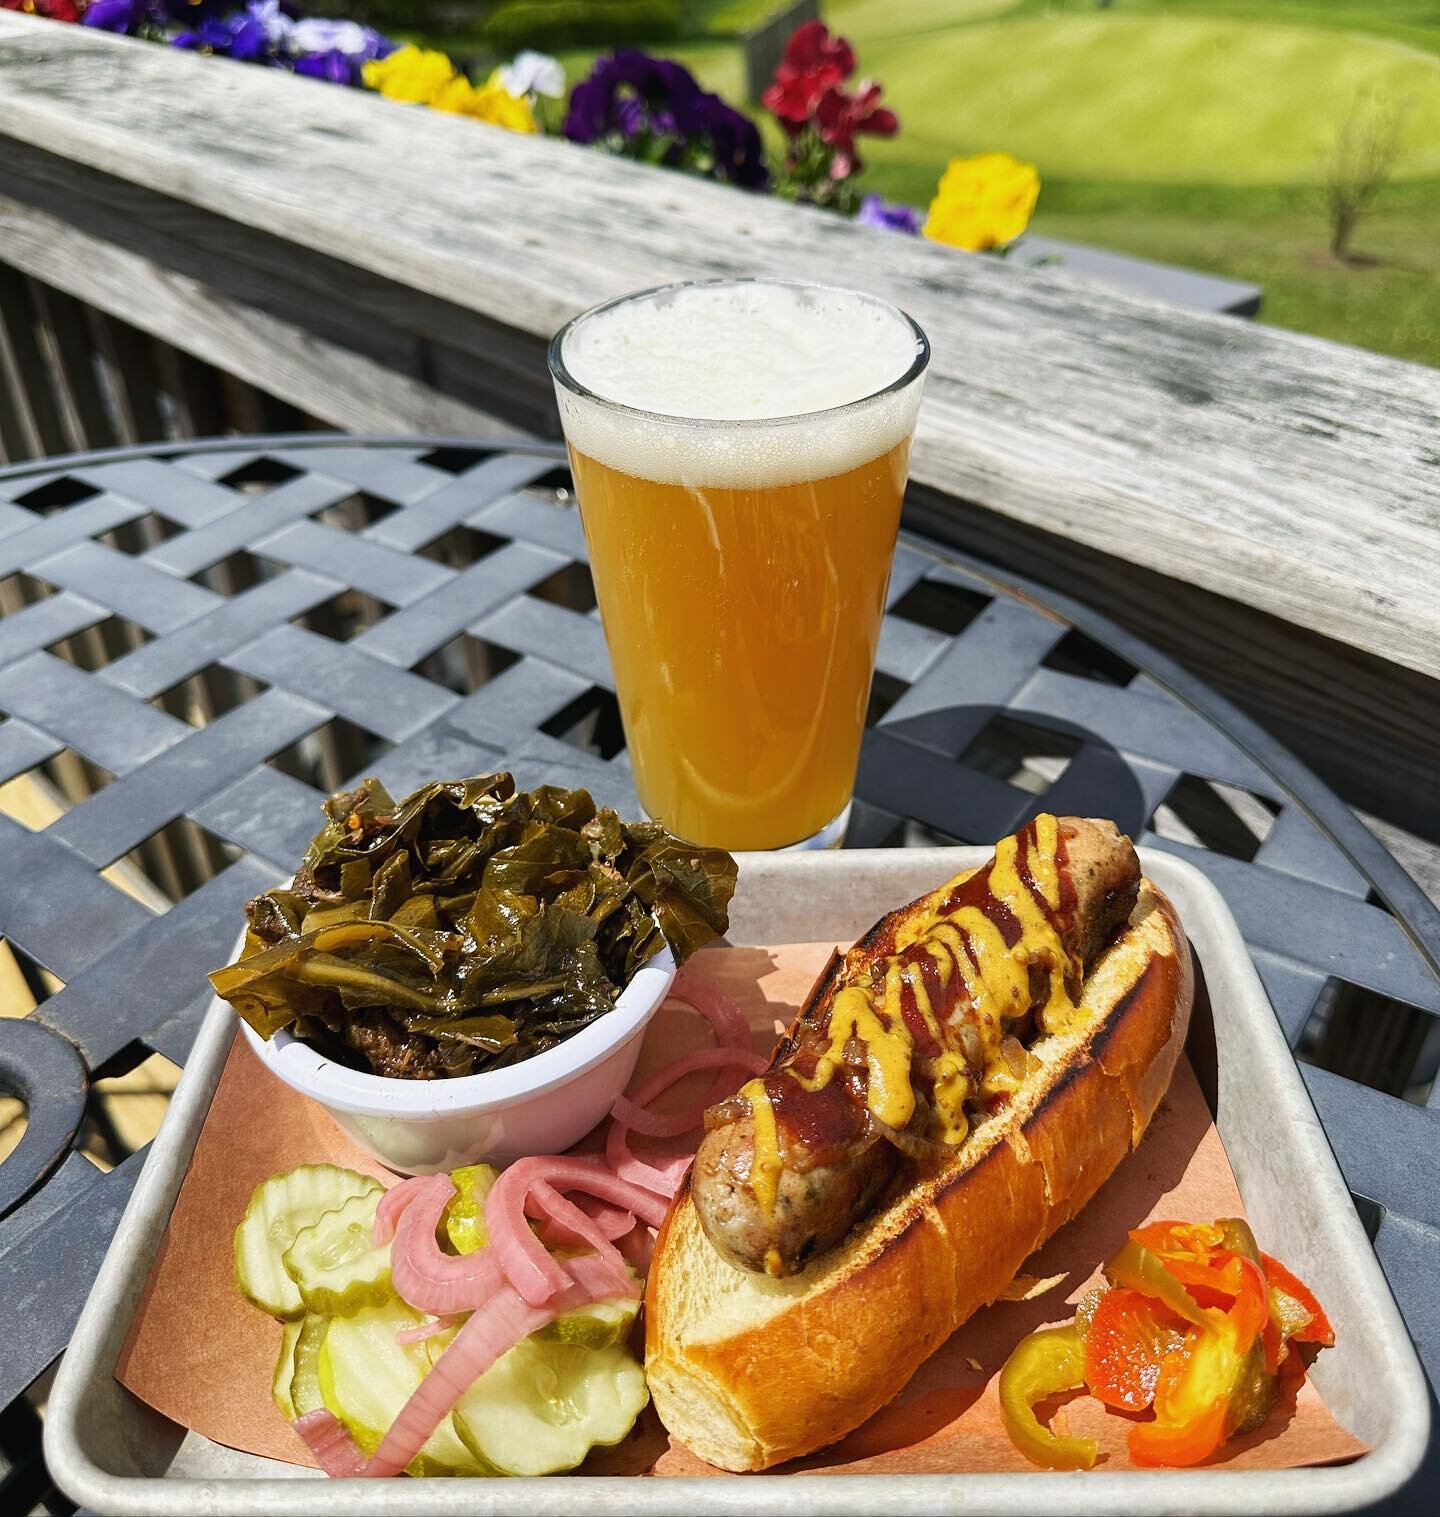 What's better than a jalape&ntilde;o cheddar sausage, collard greens and a cold @nodhillbrewery beer? #odeensbbq #odeensbbq_at_rgc #eatgood